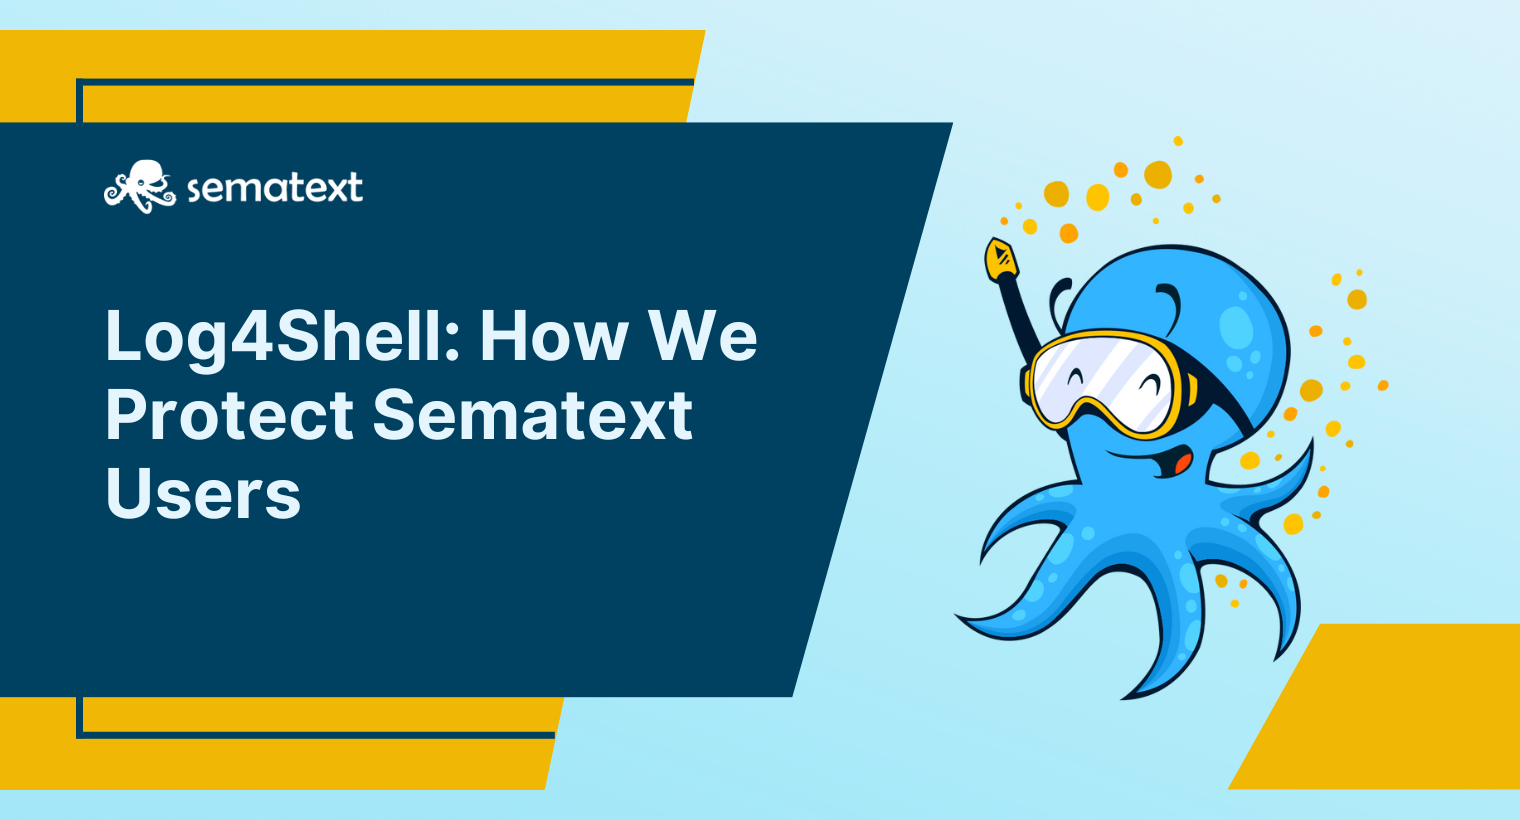 Log4Shell: How We Protect Sematext Users